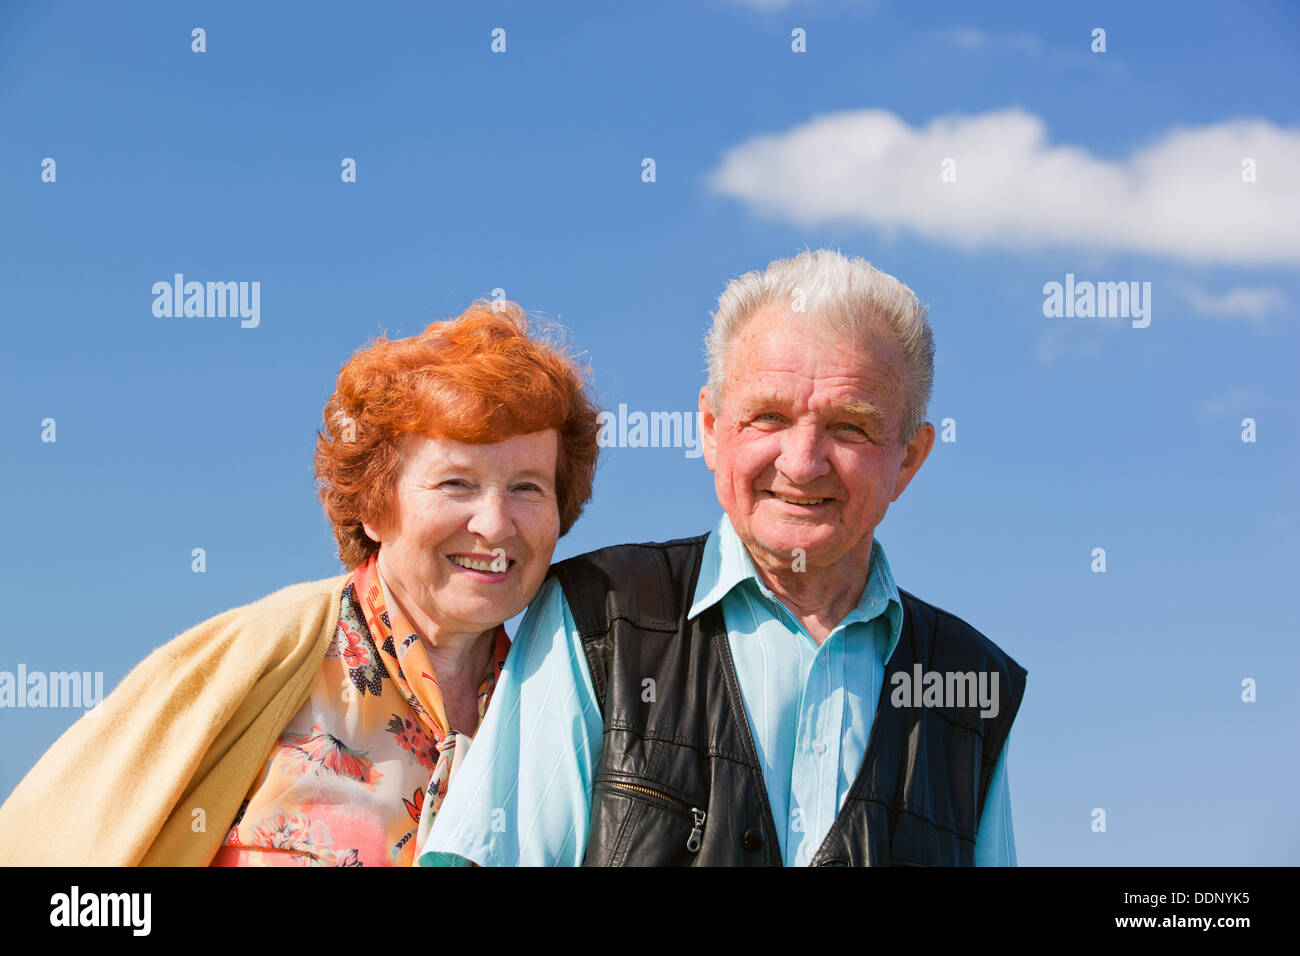 Happy senior couple together outside posing for a photograph Stock Photo